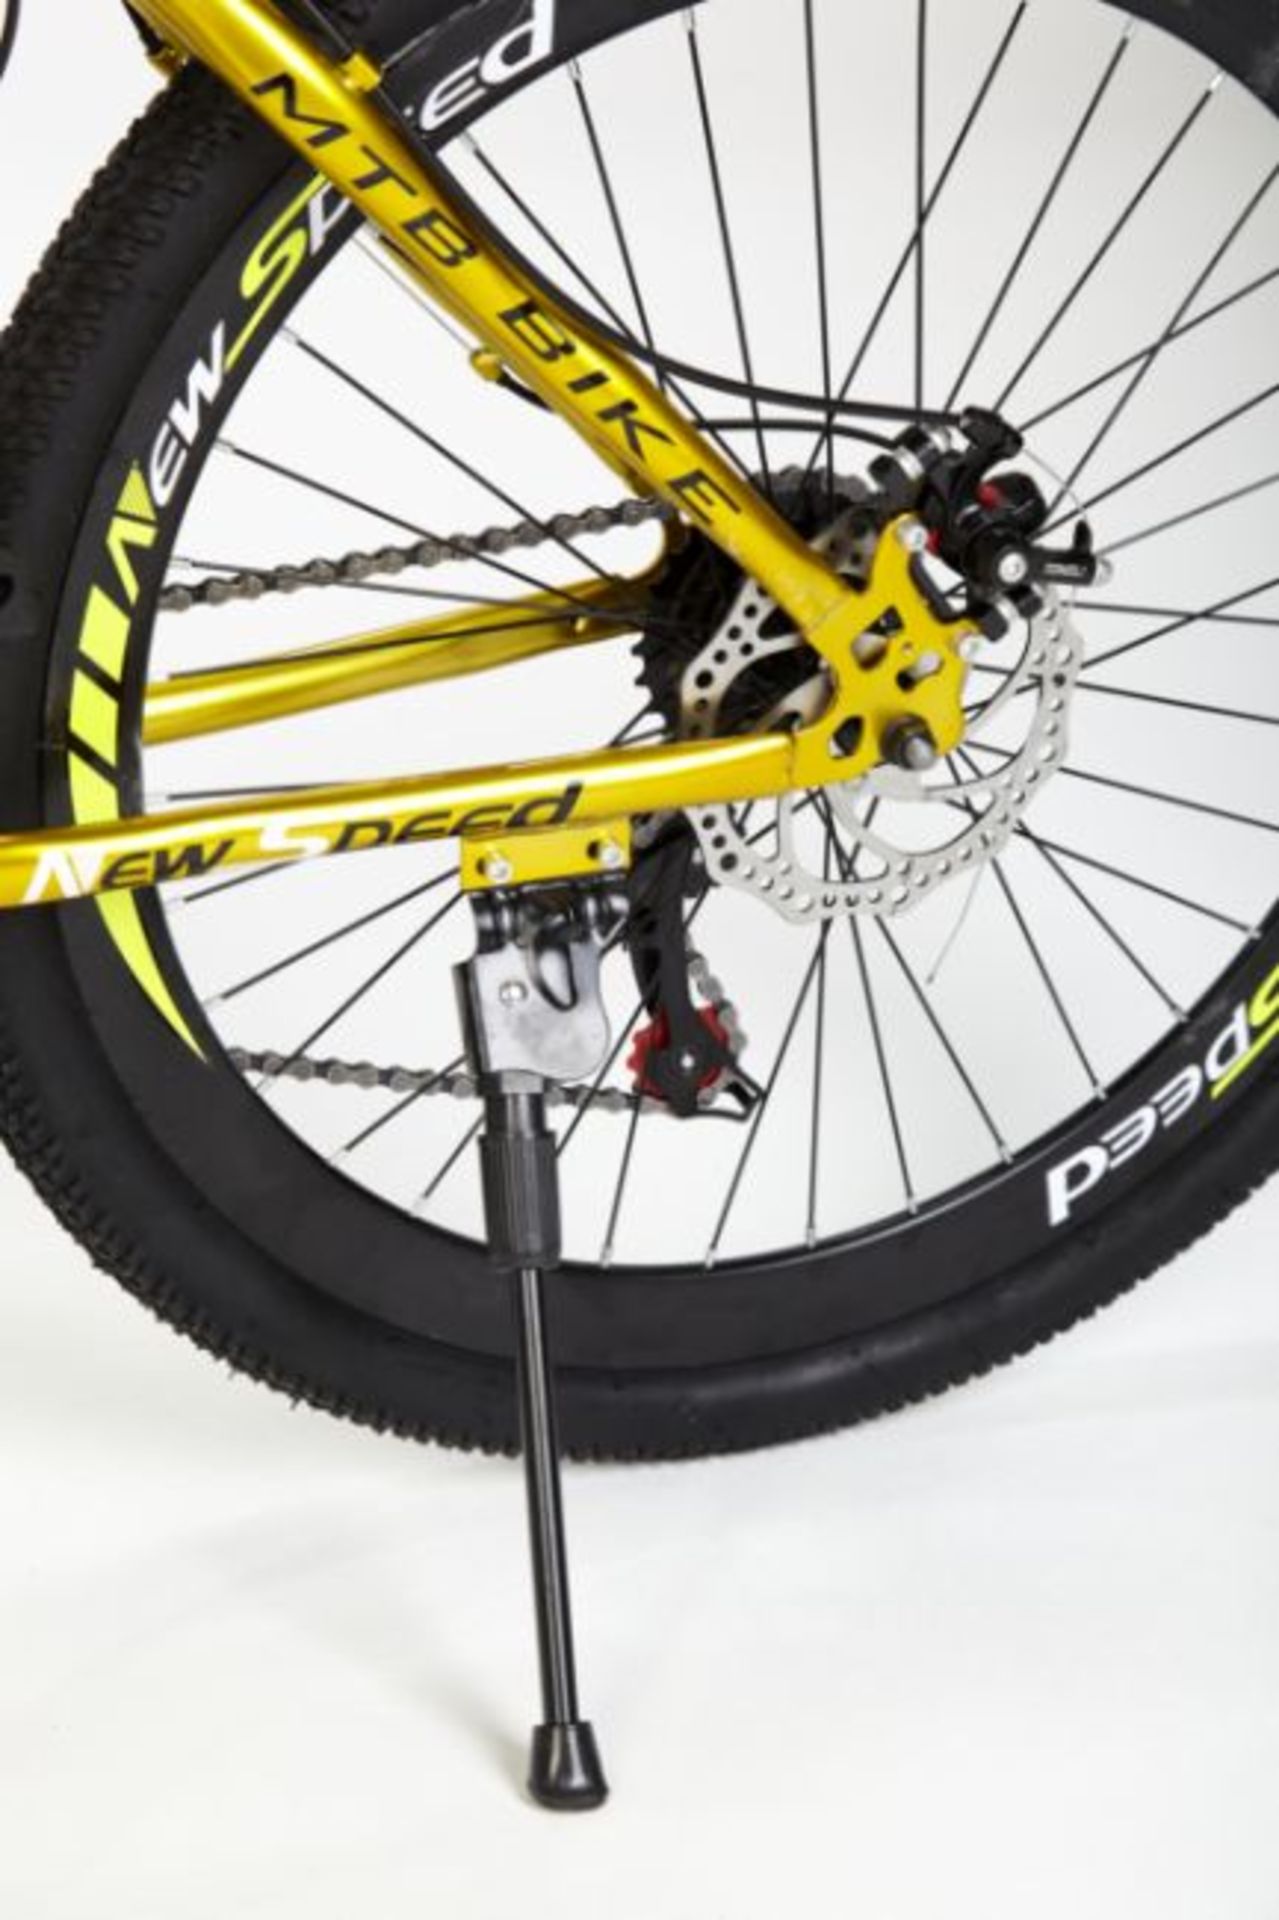 5 X BRAND NEW NEW SPEED 21 GEARS STUNNING SUSPENSION GOLD COLOURED MOUNTAIN BIKE - Image 3 of 11